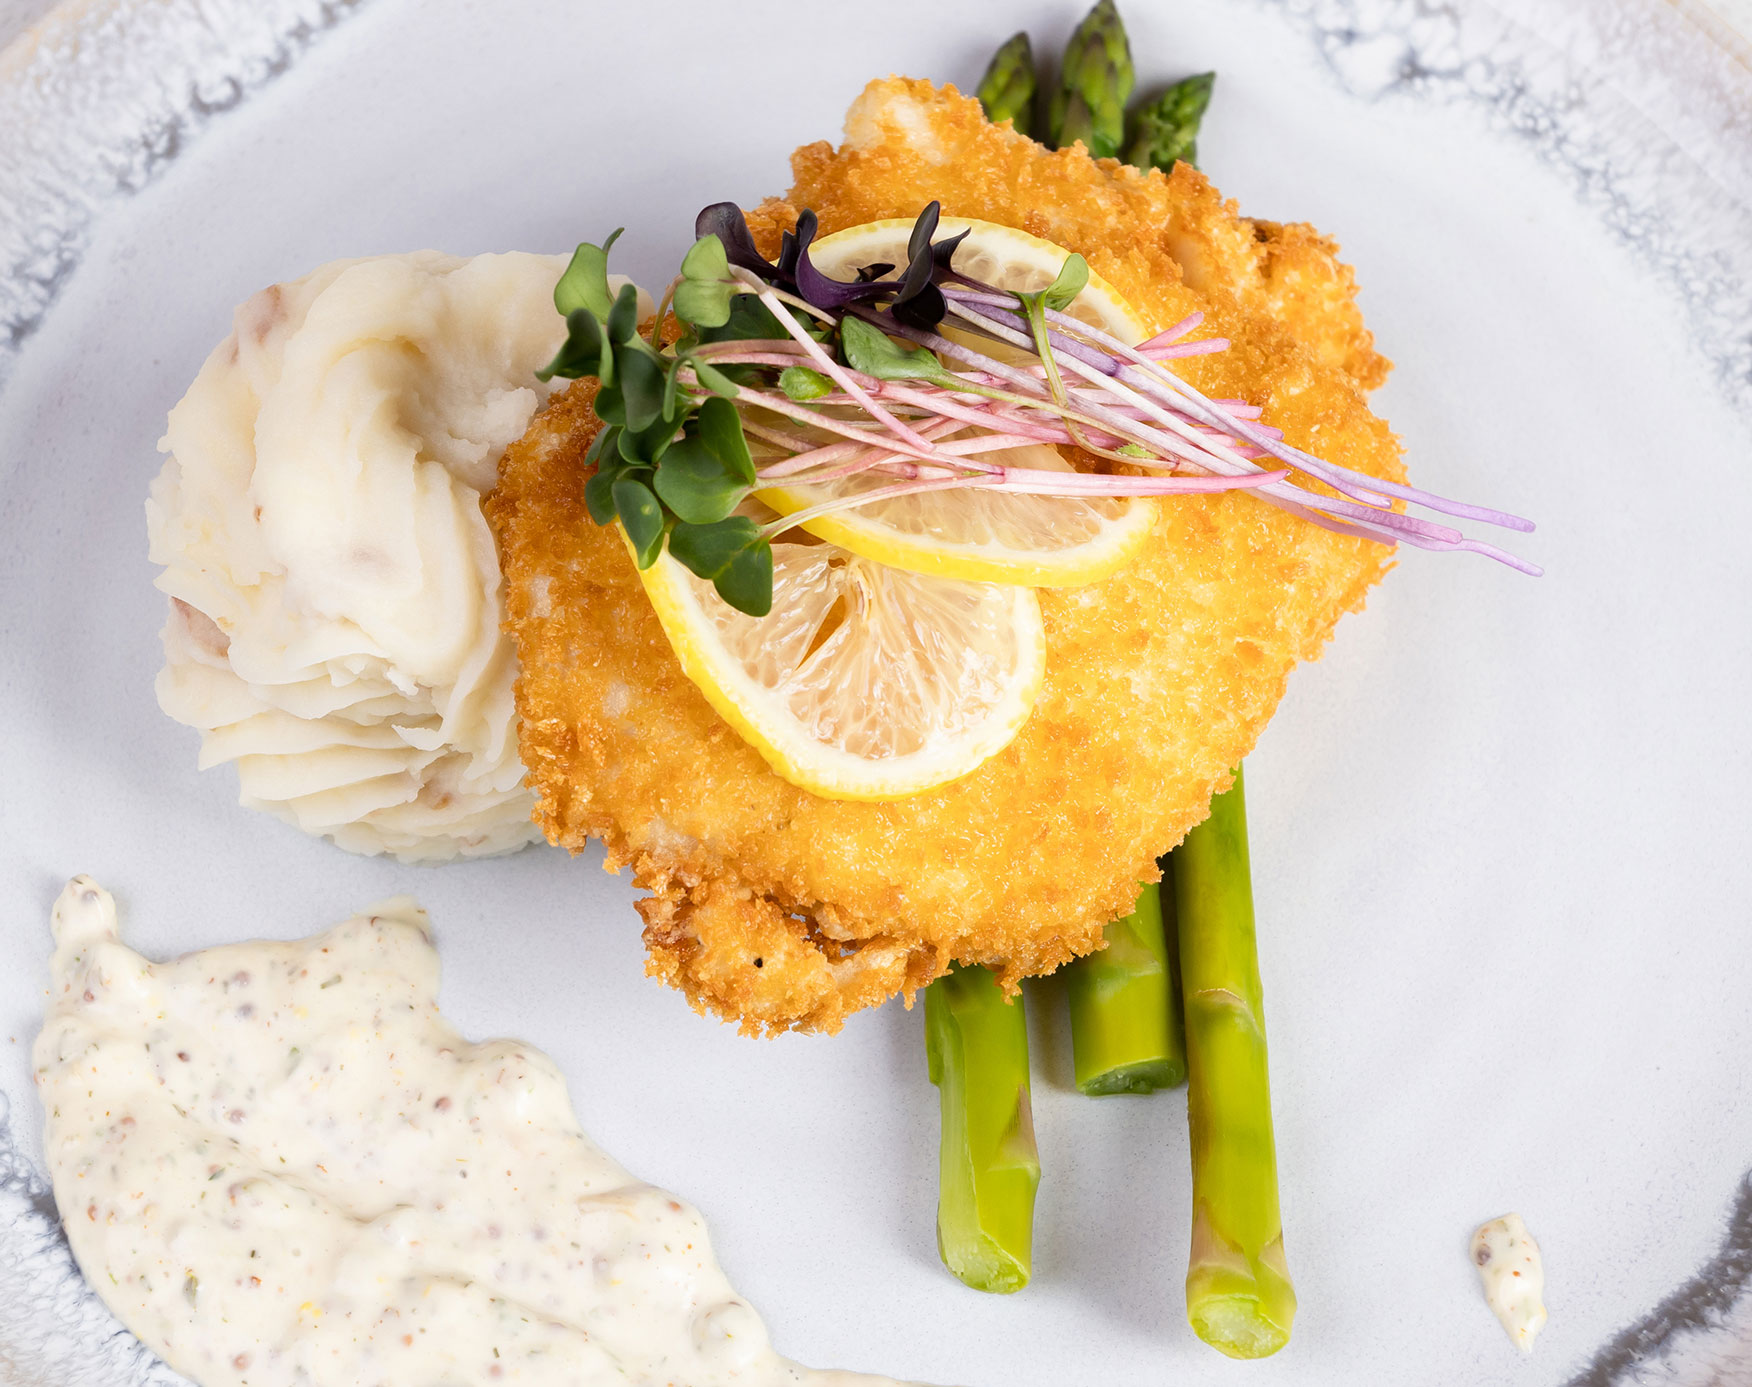 Featured image for “Panko Crusted Walleye with a Roasted Garlic Remoulade”